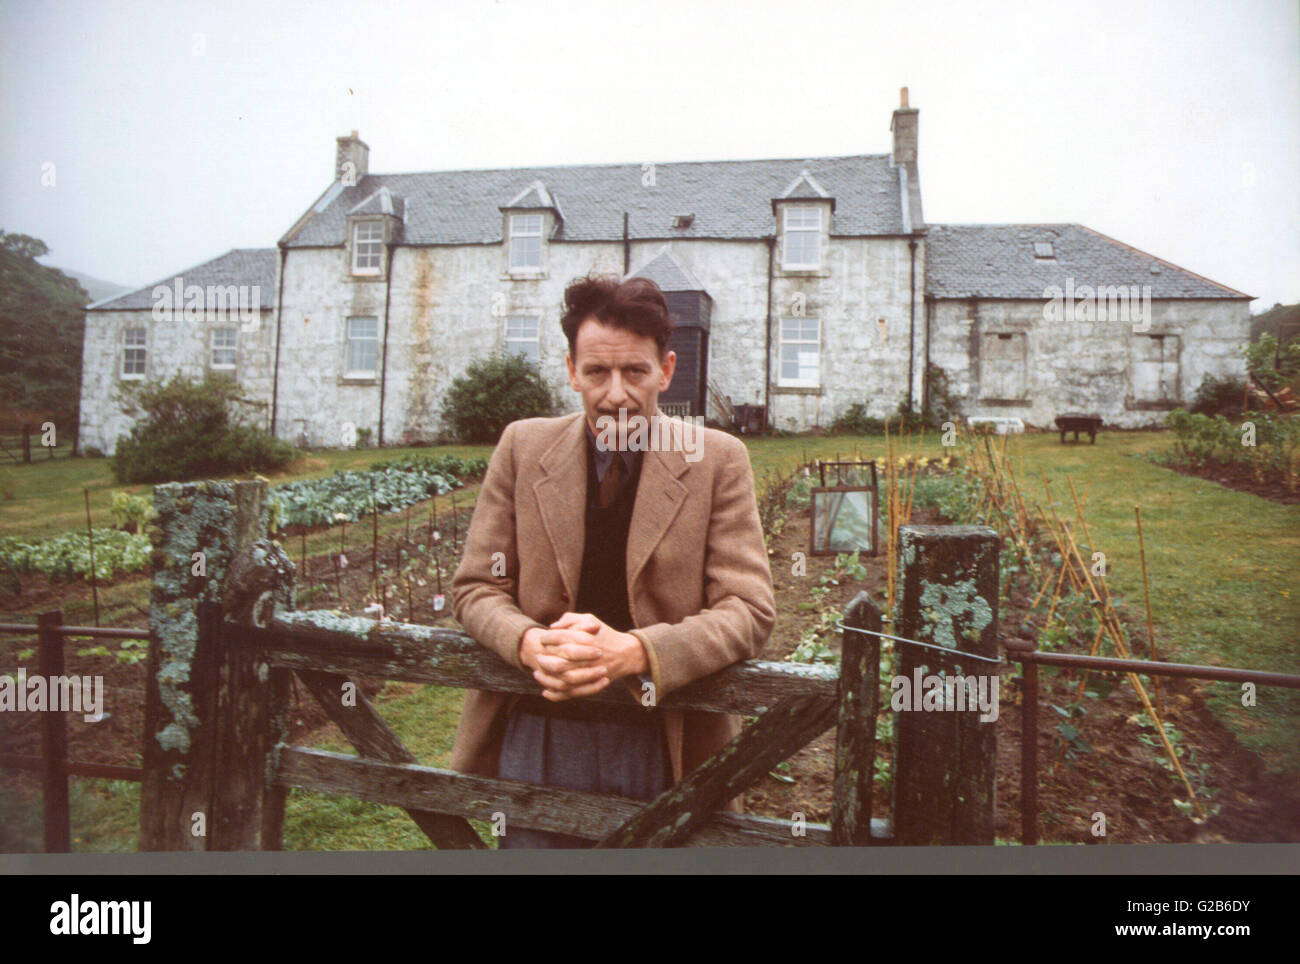 Ronald Pickup as george orwell in bbc drama 'crystal sprit...Orwell in Jura' Shot in 'Barnhill',on Jura,house Orwell lived in Stock Photo